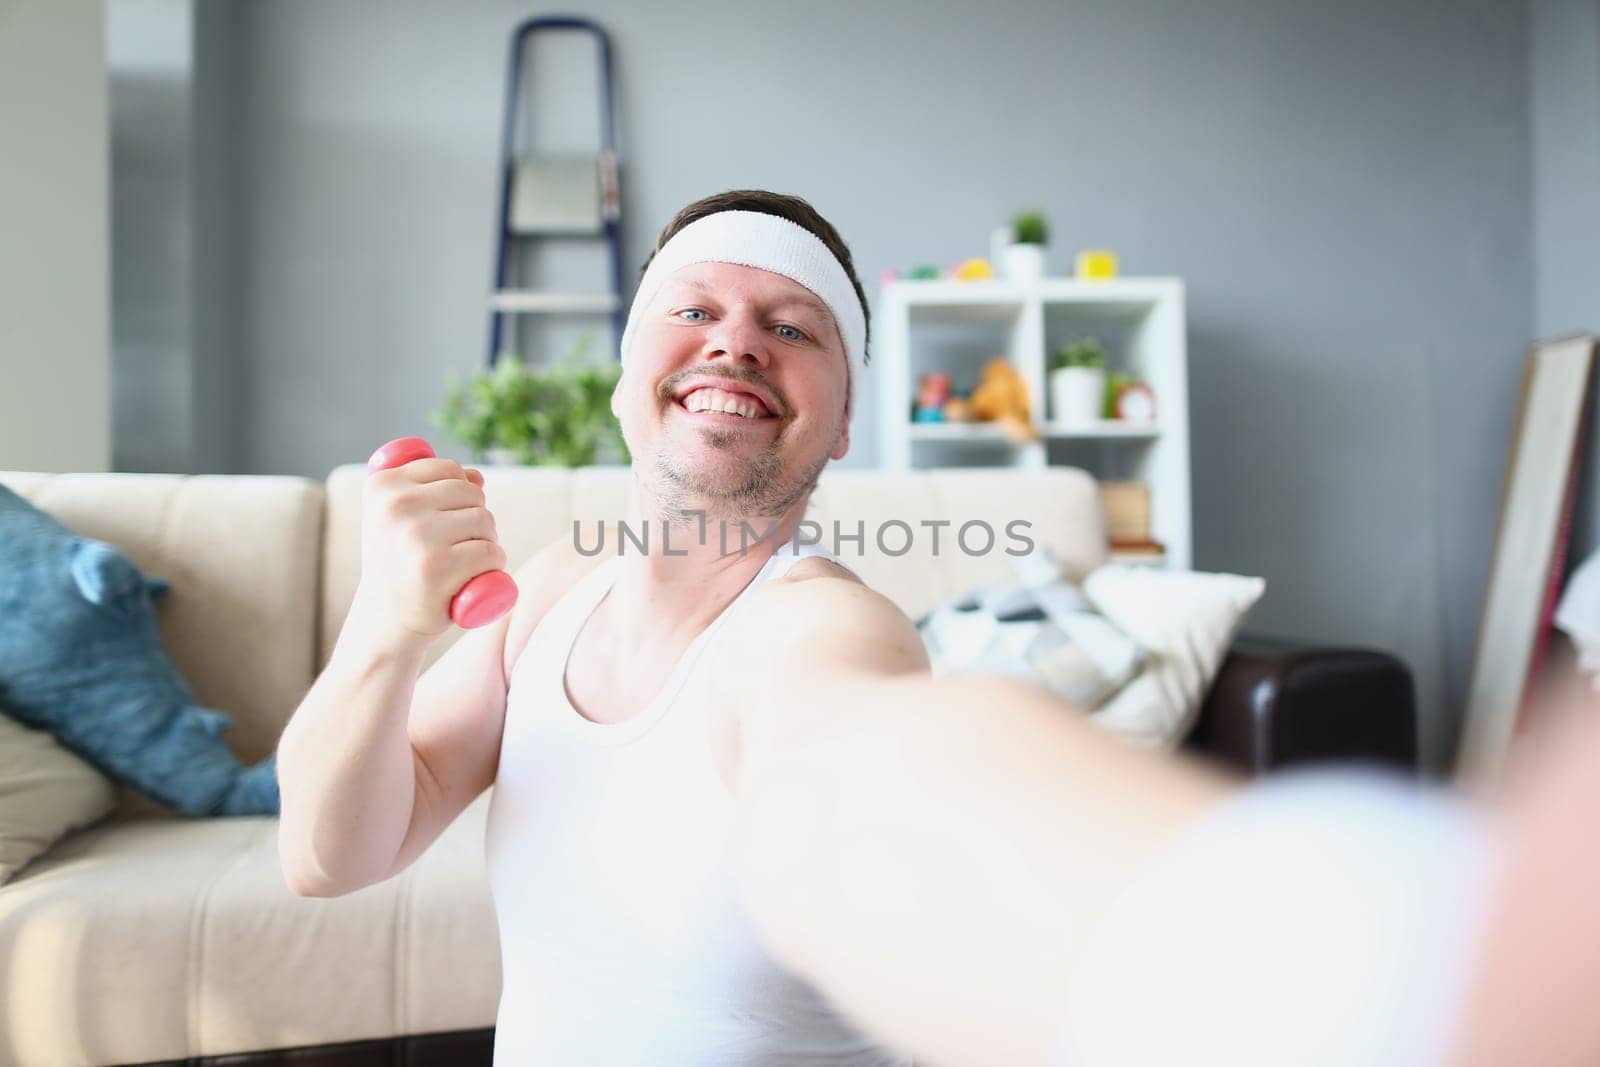 Smiling happy man with dumbbell makes selfie. Home fitness and sports workout blog concept